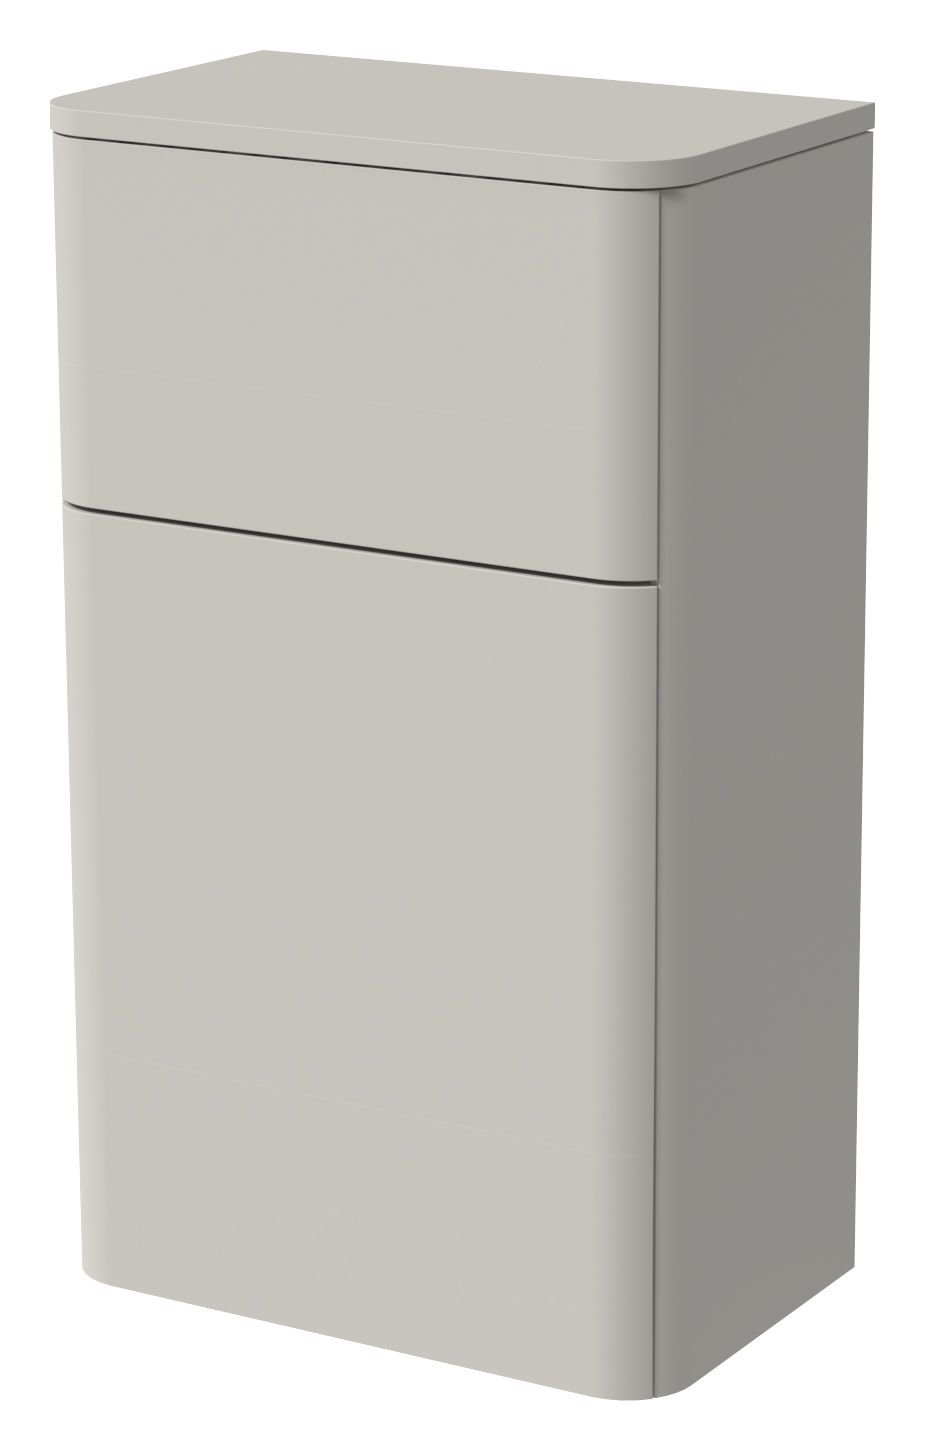 Image of Wickes Malmo Light Grey Freestanding Toilet Unit - 832 x 500mm